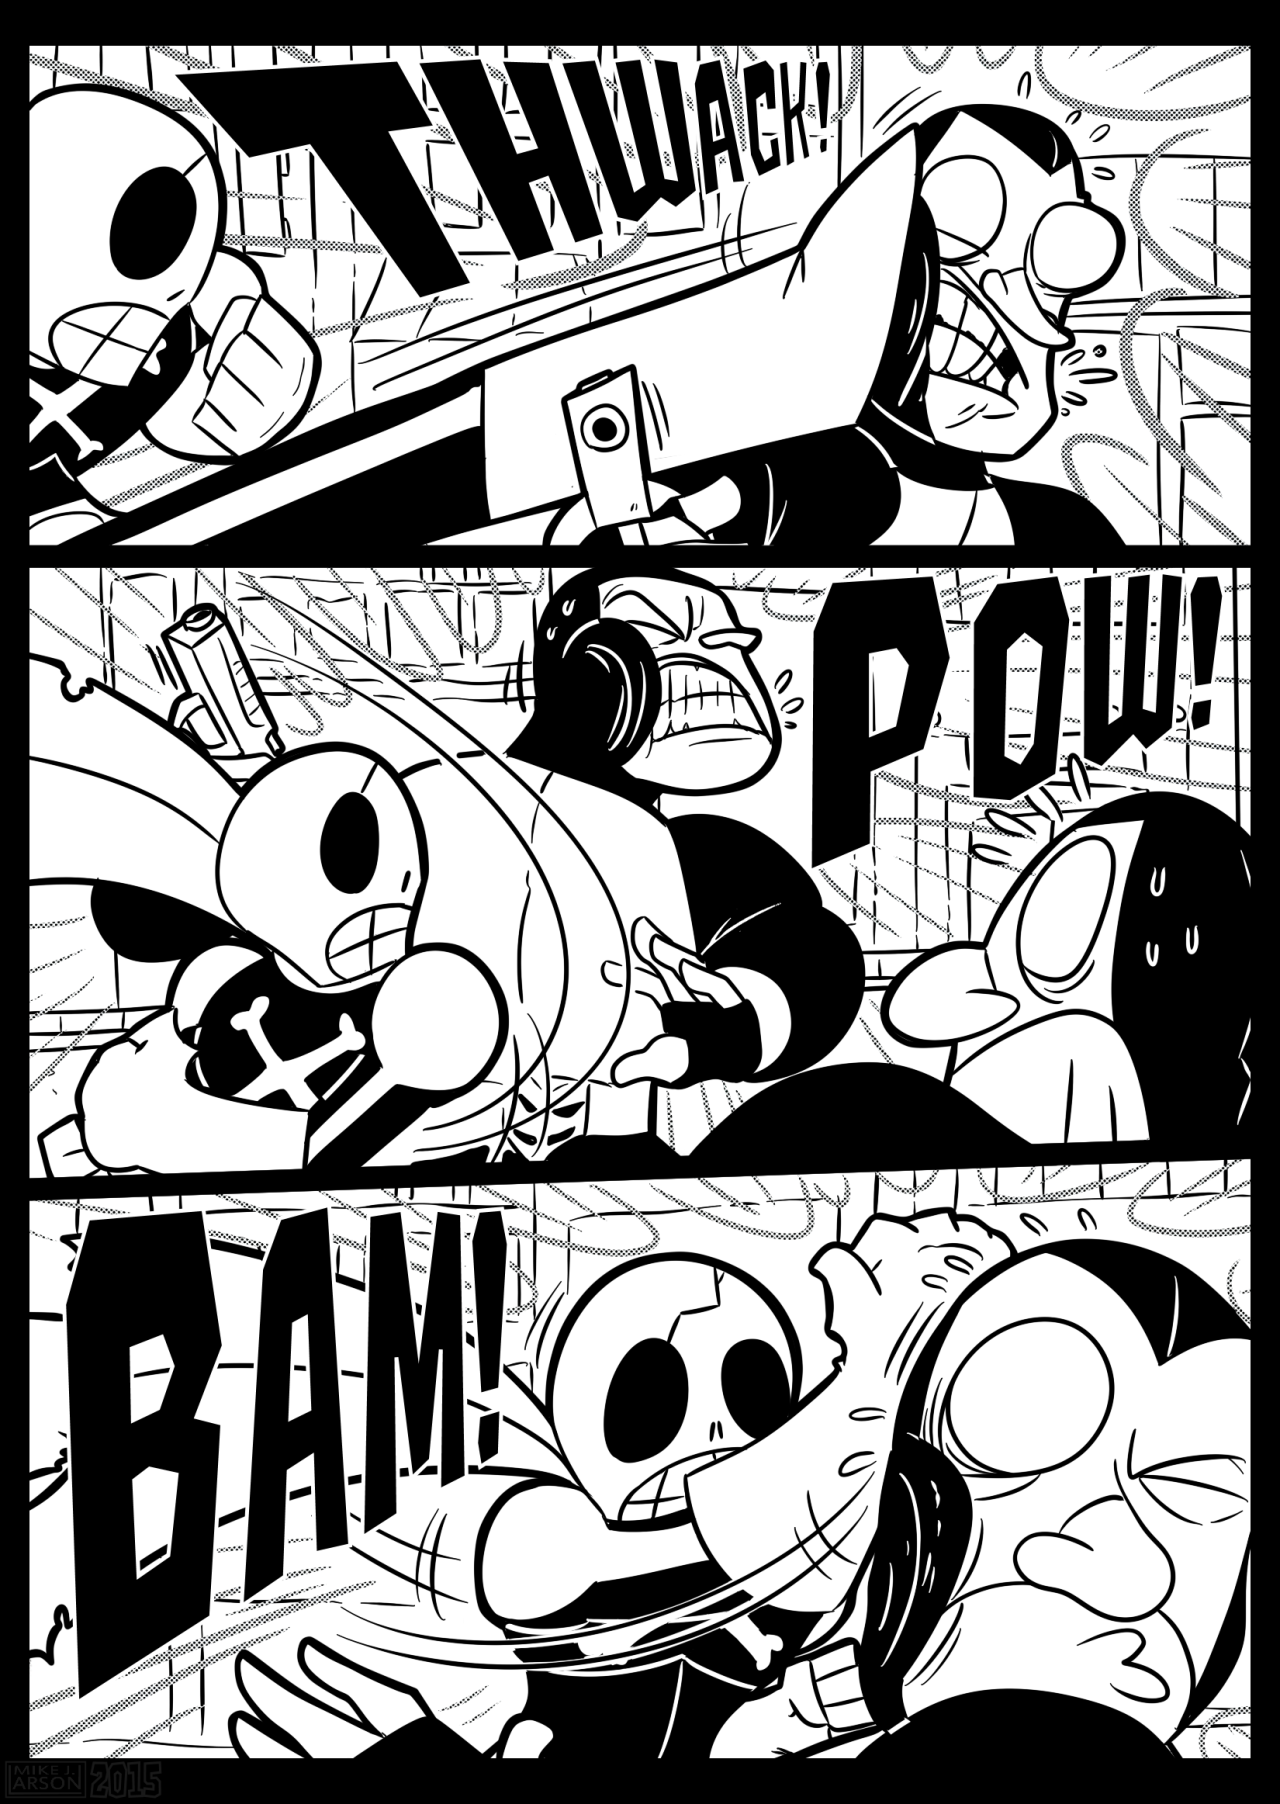 The first ten pages of a tokusatsu-inspired comic series I’m working on called